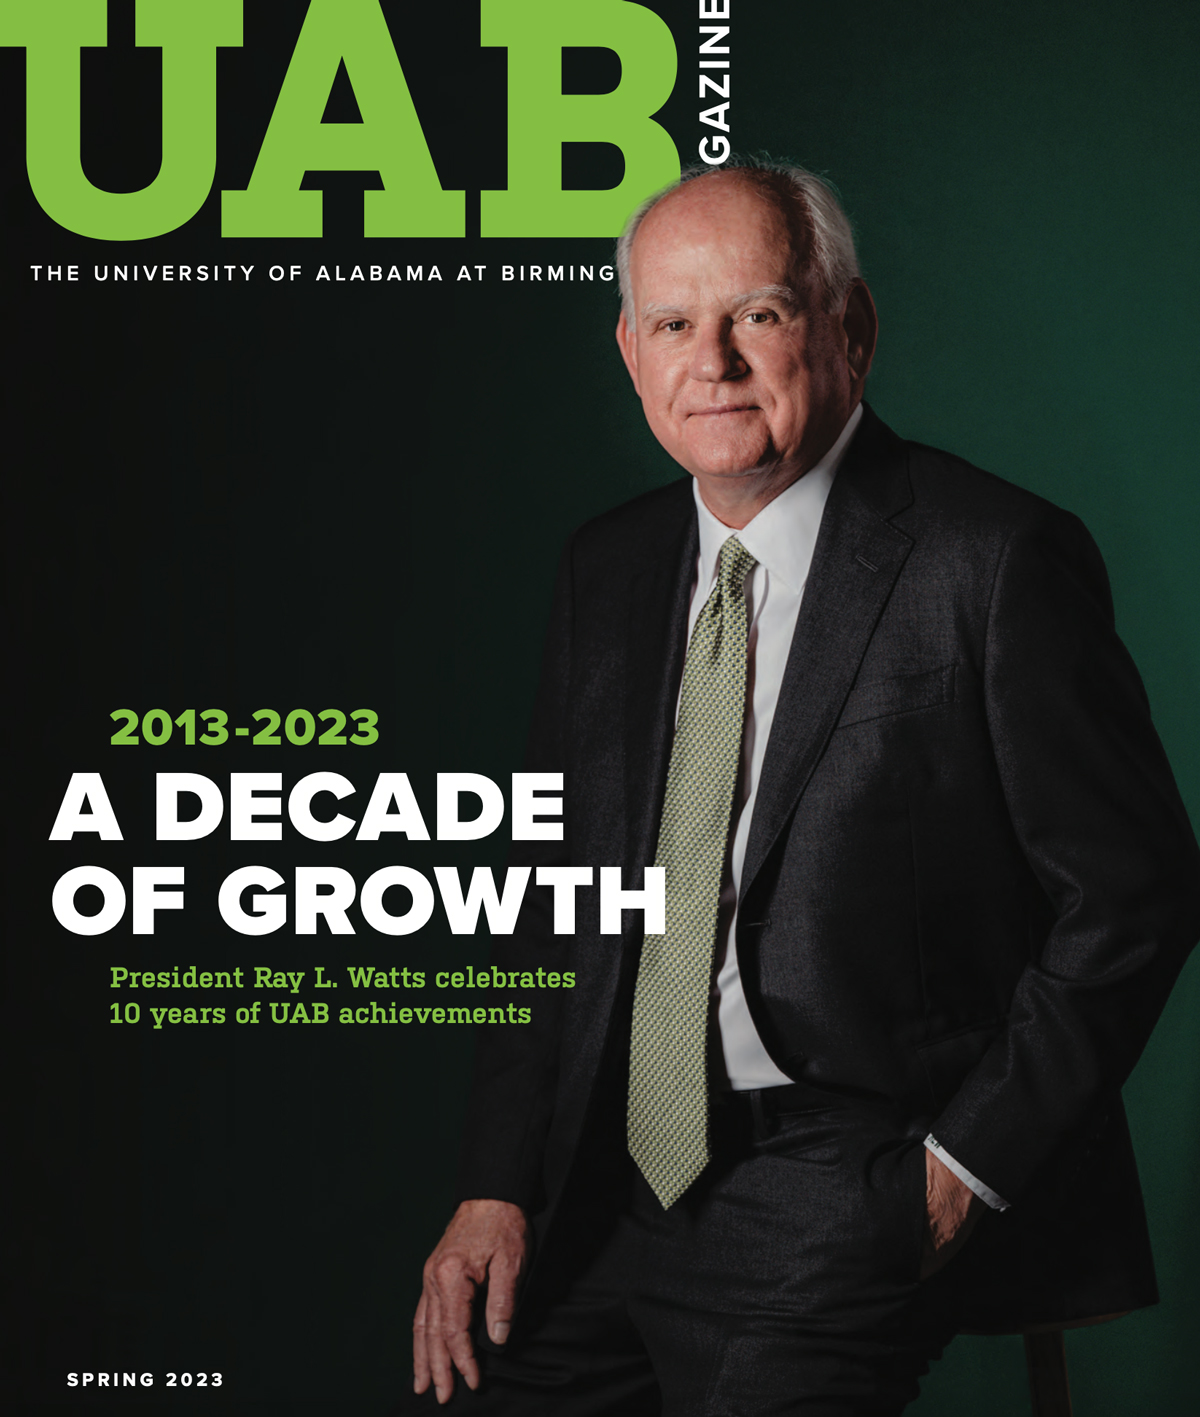 2013-2023: A Decade of Growth. President Ray L. Watts celebrates 10 years of UAB achievements.